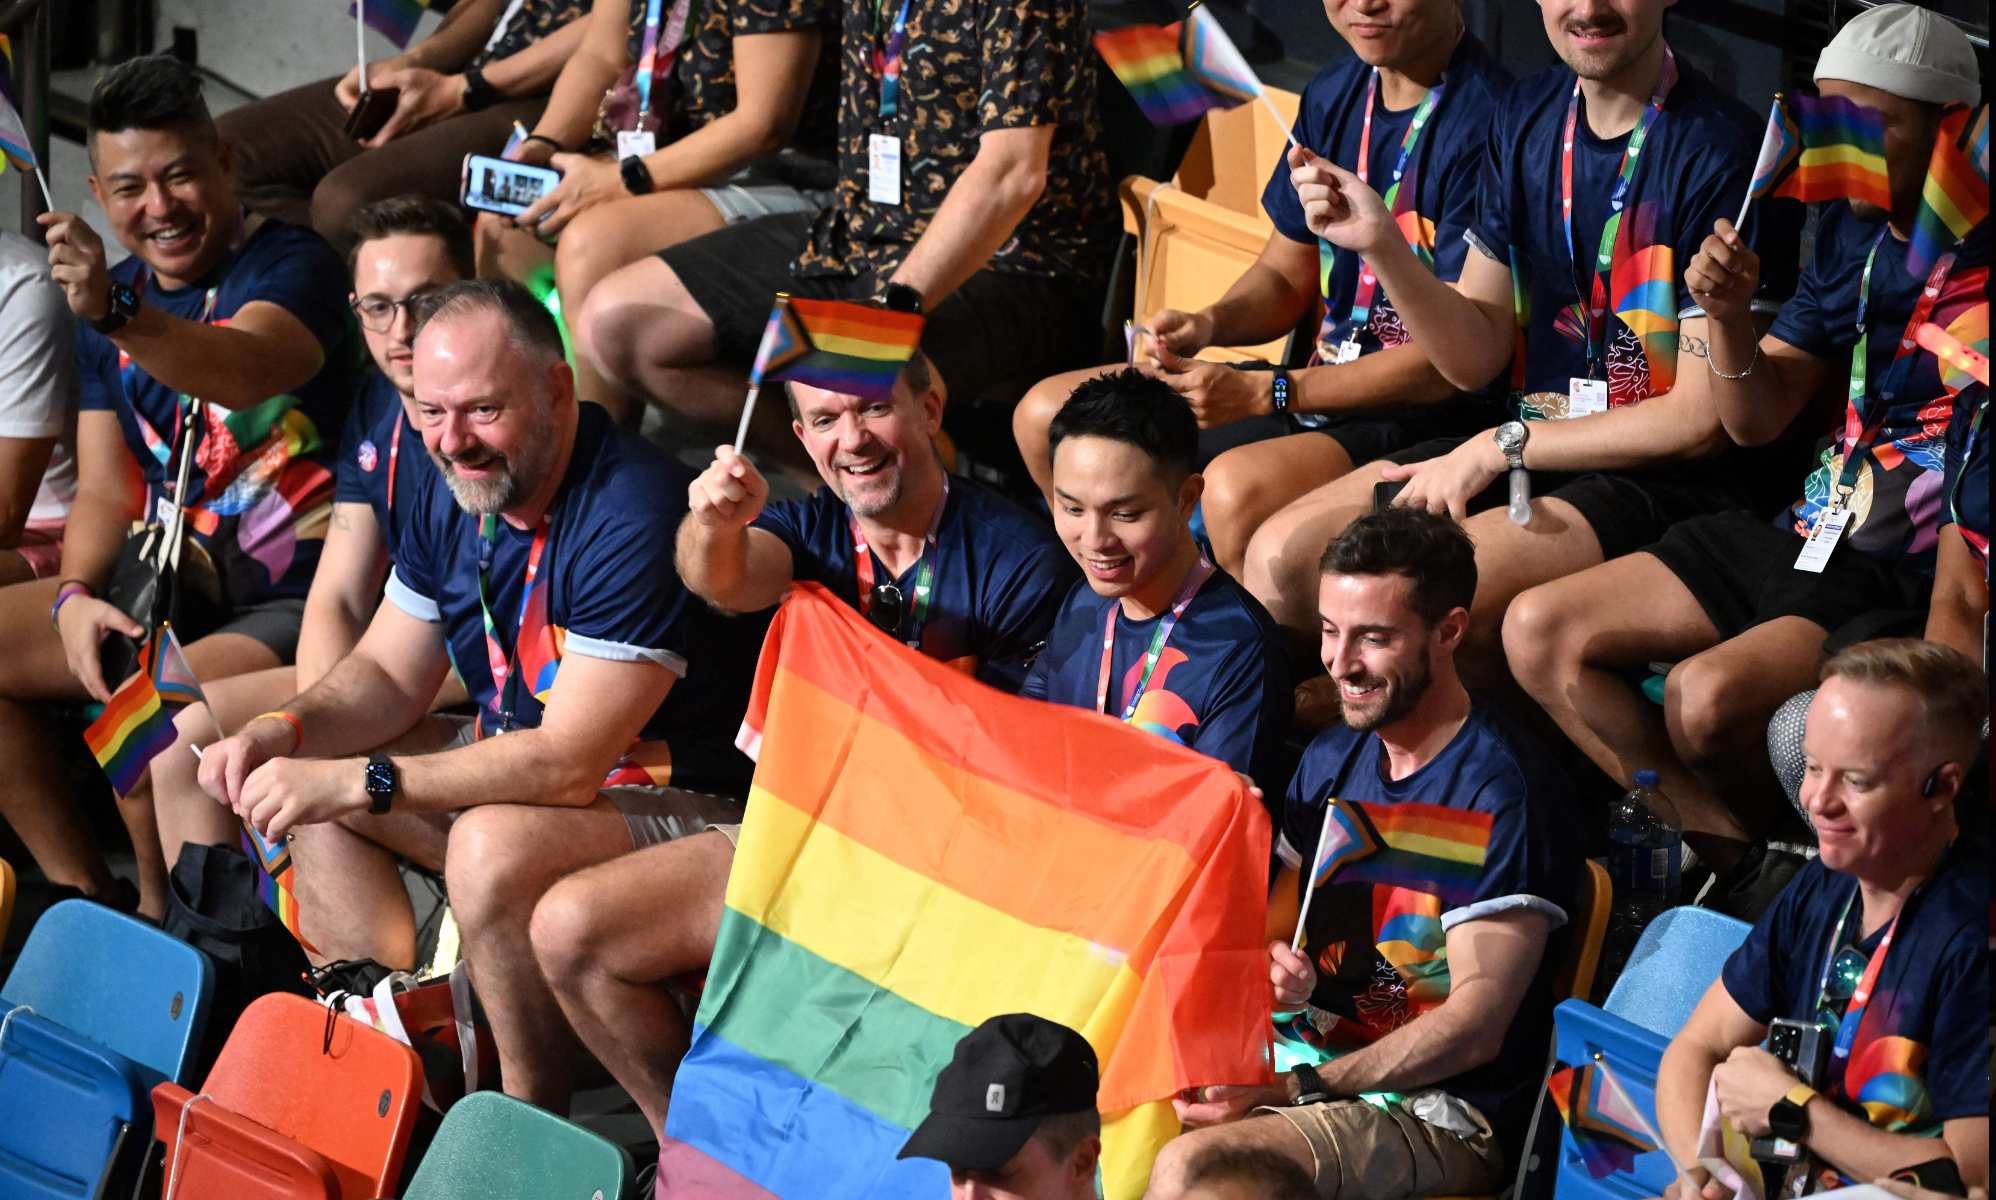 Supporters celebrate opening of Gay Games in Hong Kong, first in Asia,  despite lawmakers' opposition